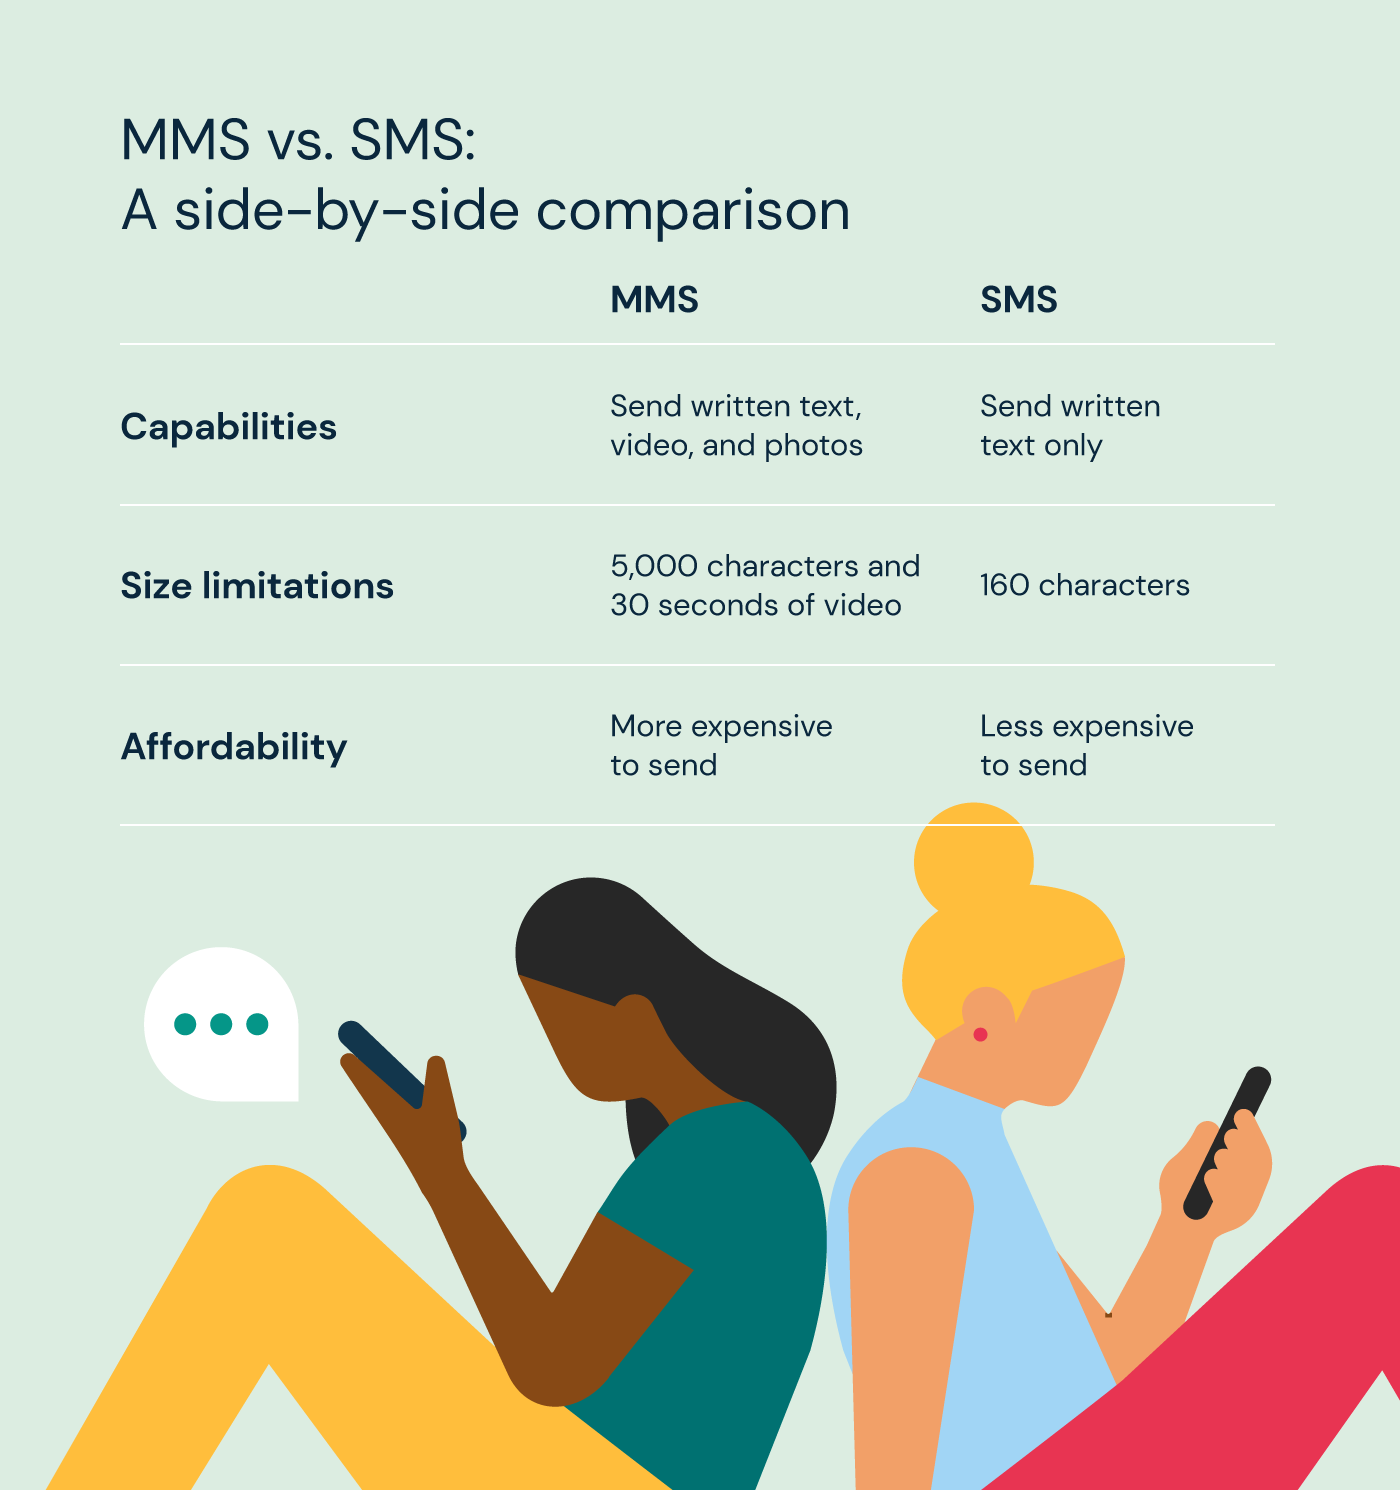 Image shows the differences between MMS and SMS messaging features